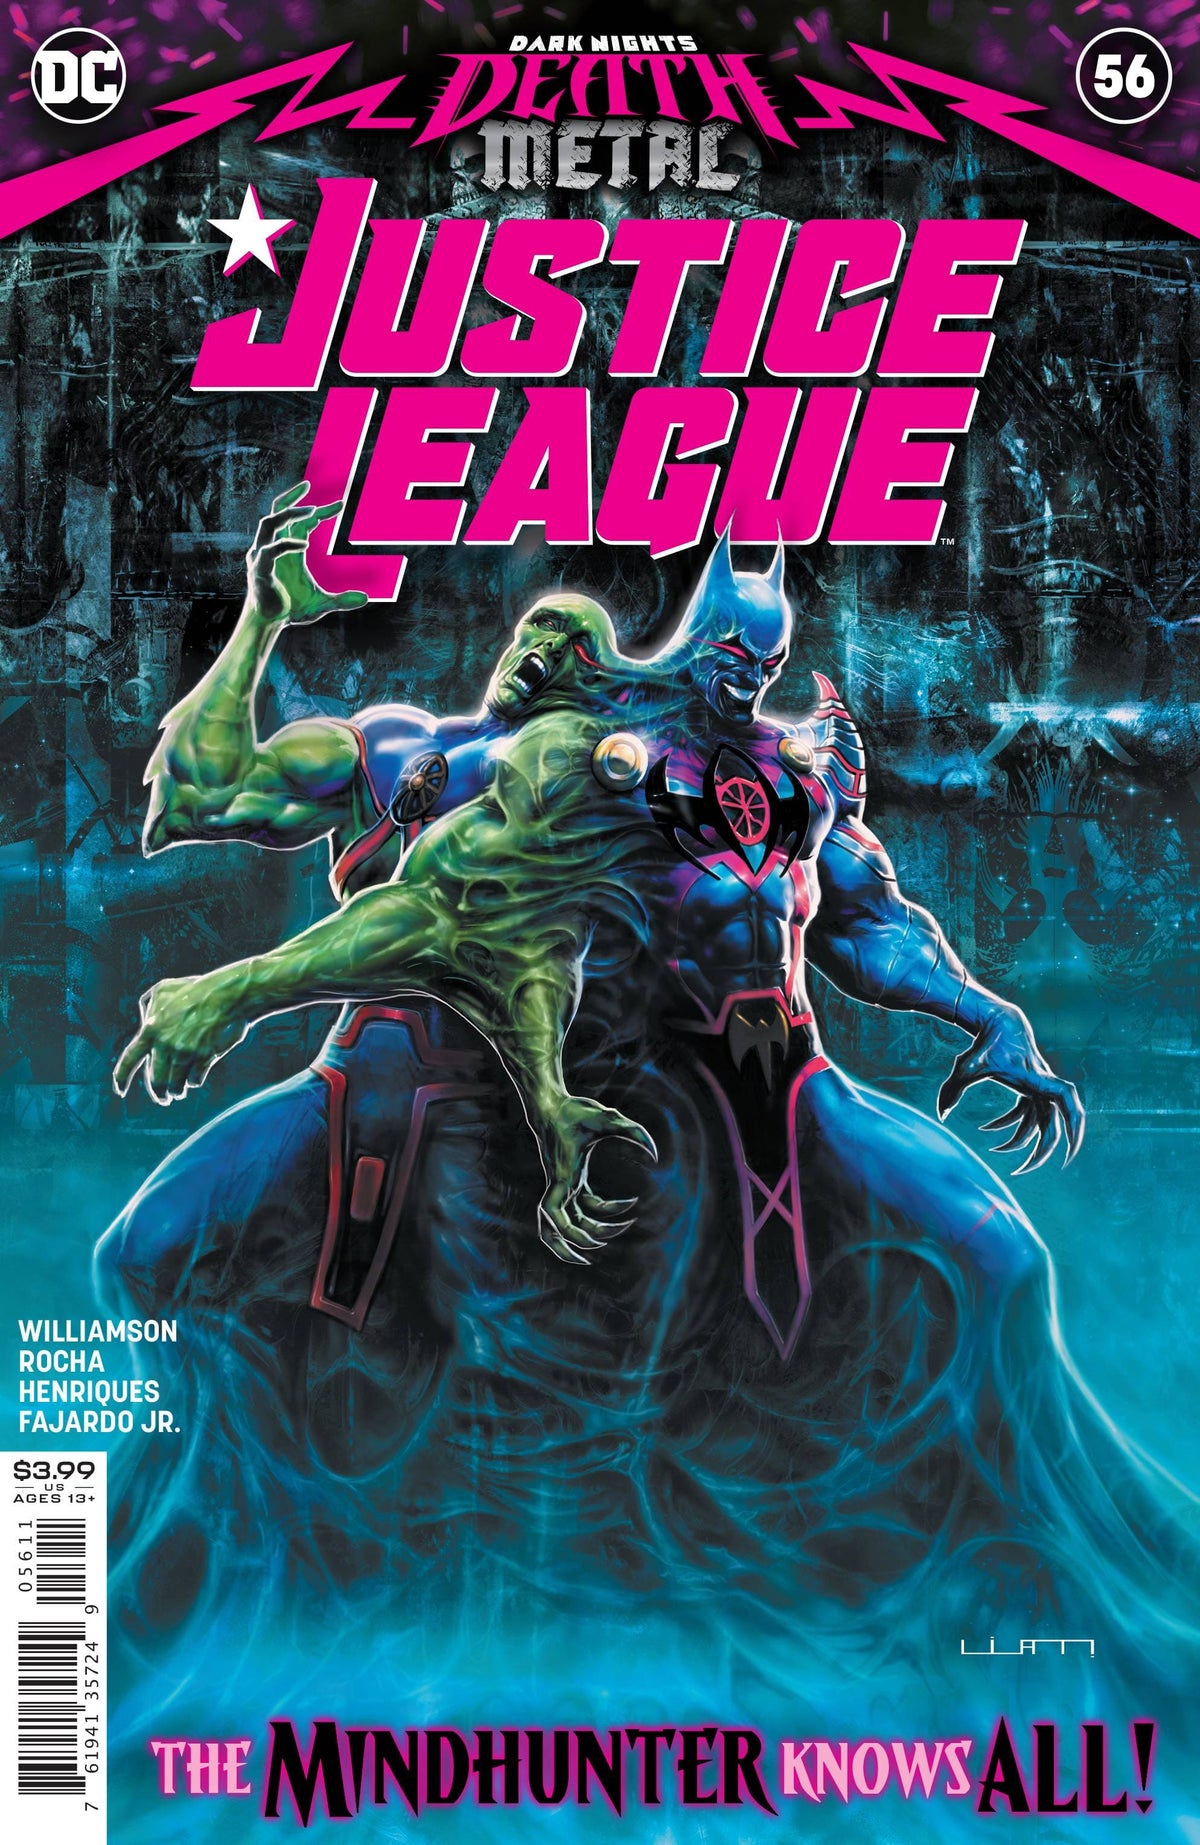 JUSTICE LEAGUE #56 - Third Eye